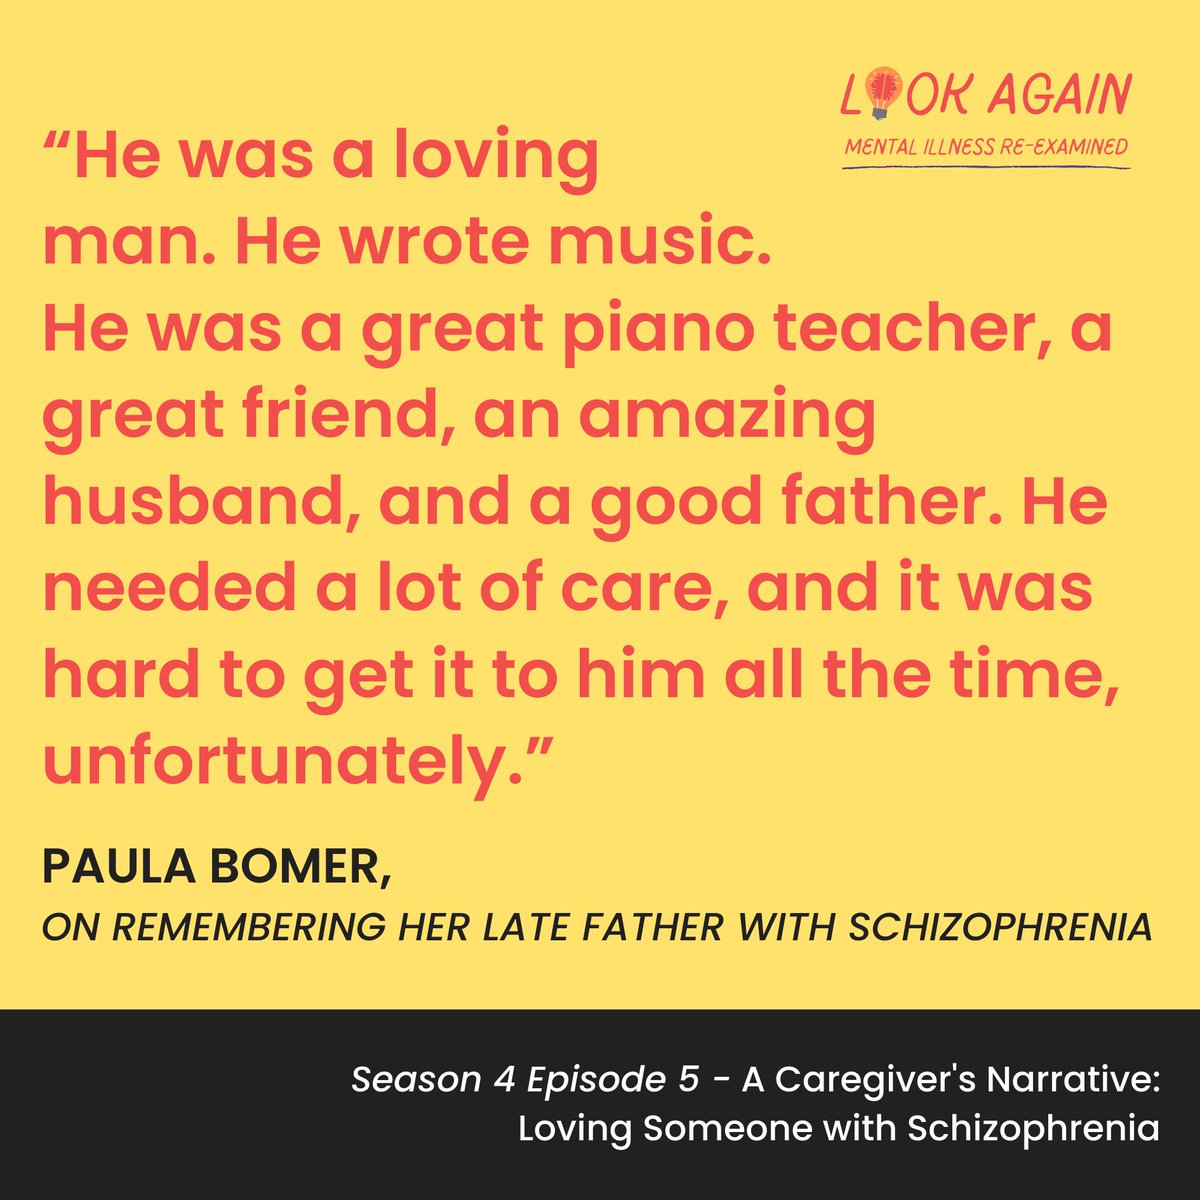 #FamilyCaregivers of those with #MentalIllness understand how the affects can be felt throughout the entire famly. One woman generously shares her story in this episode of Look Again from @BCSchizophrenia. Listen here: link.chtbl.com/BCSS?sid=socia…